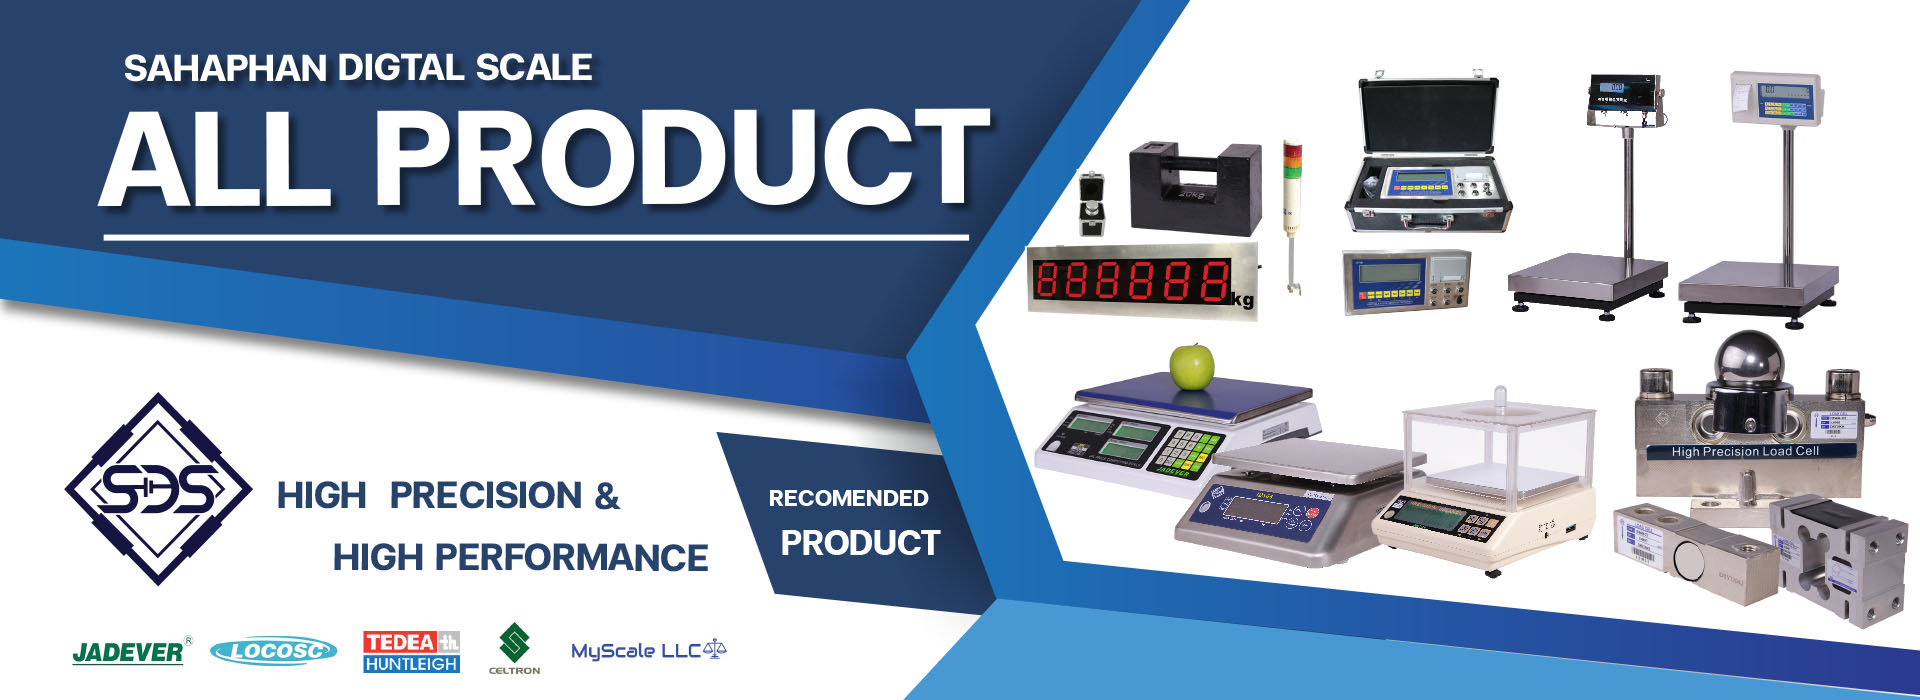 banner-PRODUCT